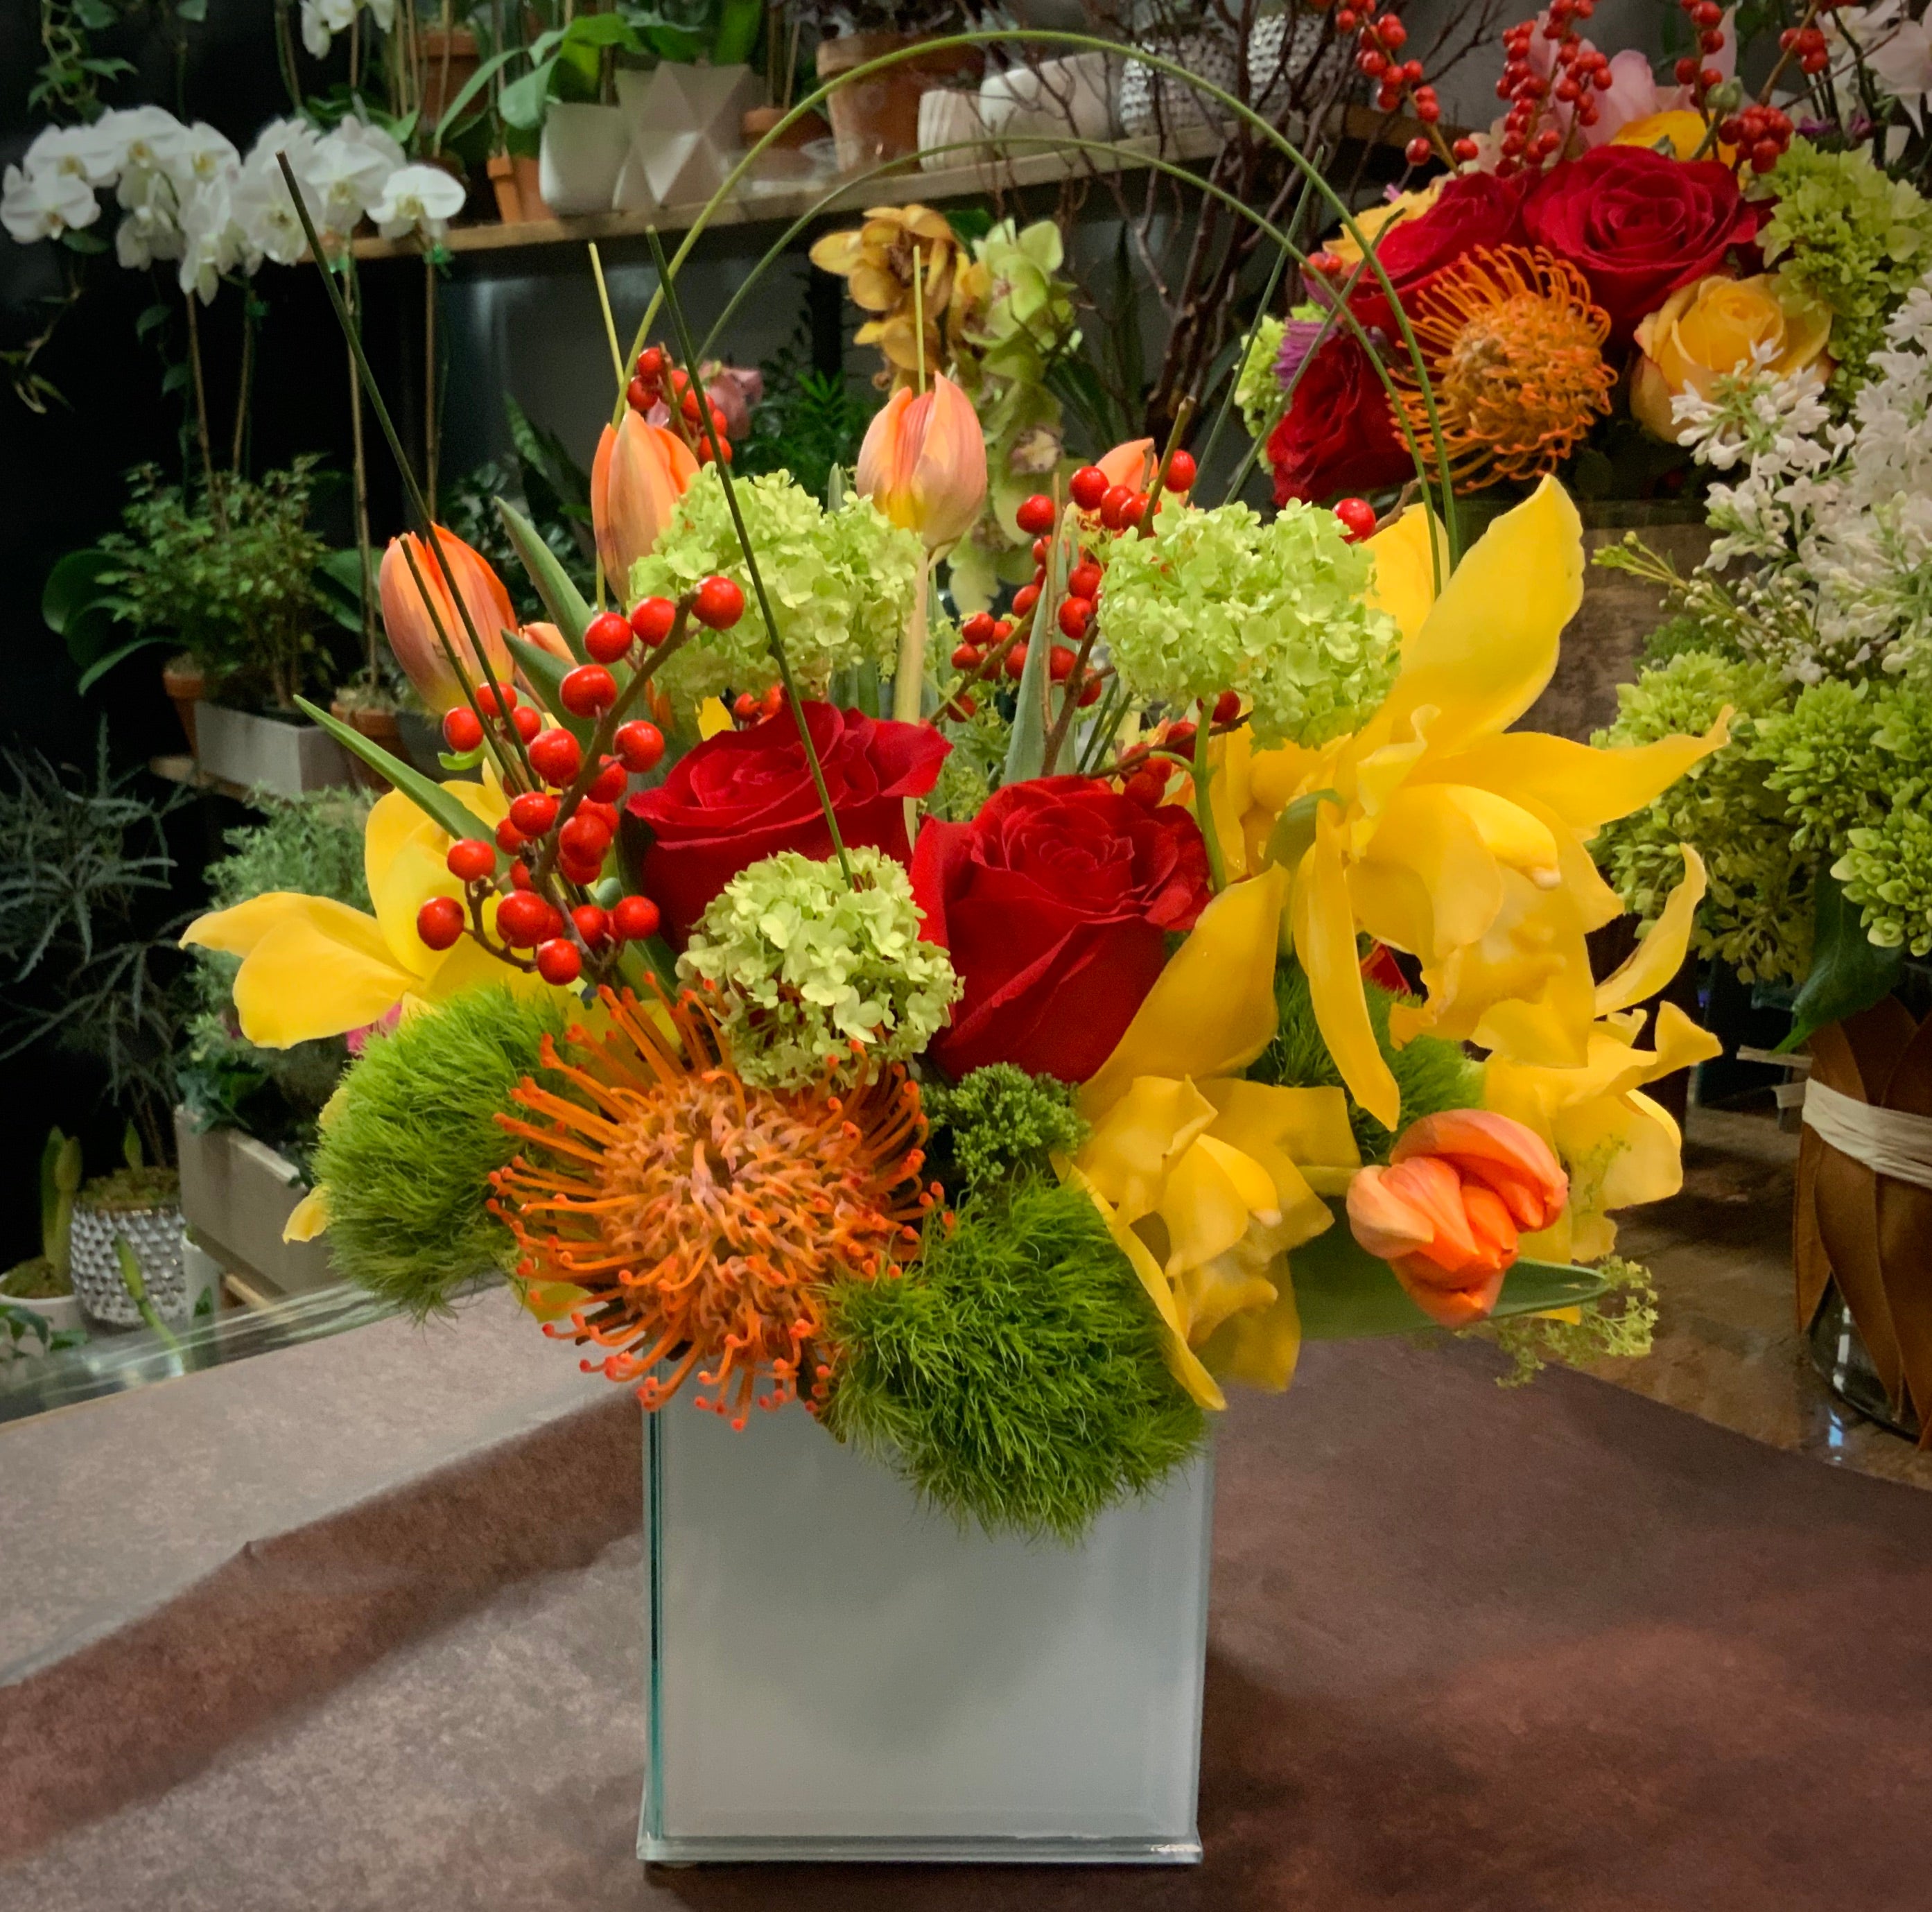 Contemporary arrangement in 6" cube or cylinder- priced as shown